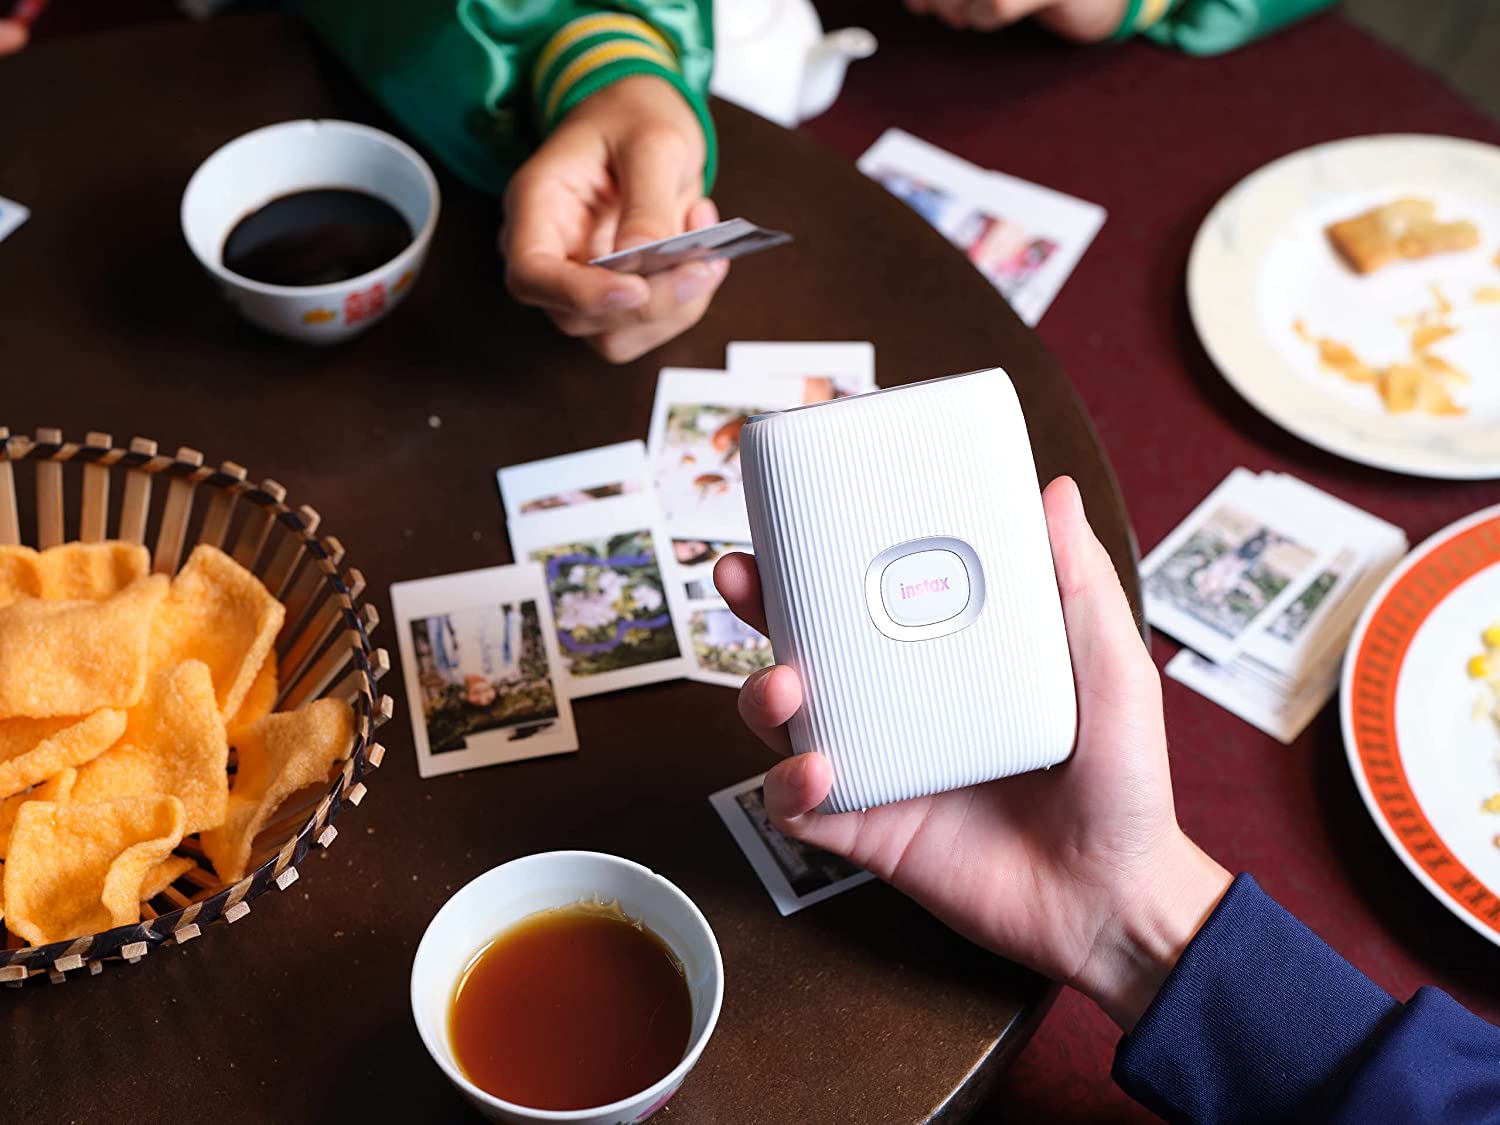 A hand is holding a Bluetooth smartphone printer while at a table. Another hand is holding a photo while other photos are scattered around on the table.